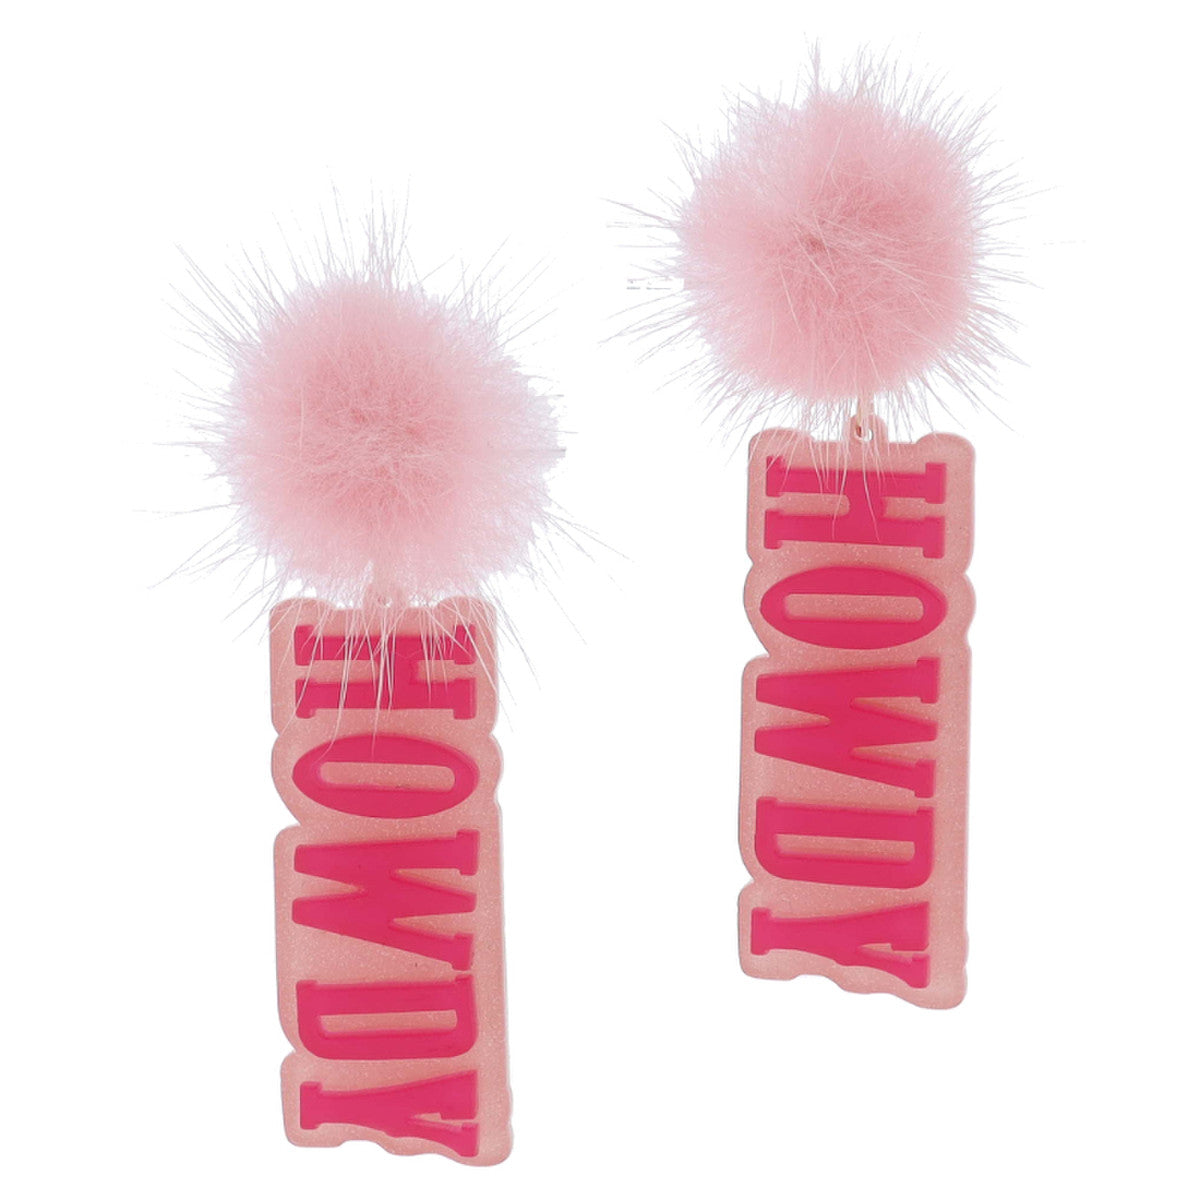 PINK POST WITH "HOWDY" IN PINK AND HOT PINK ACRYLIC EARRINGS